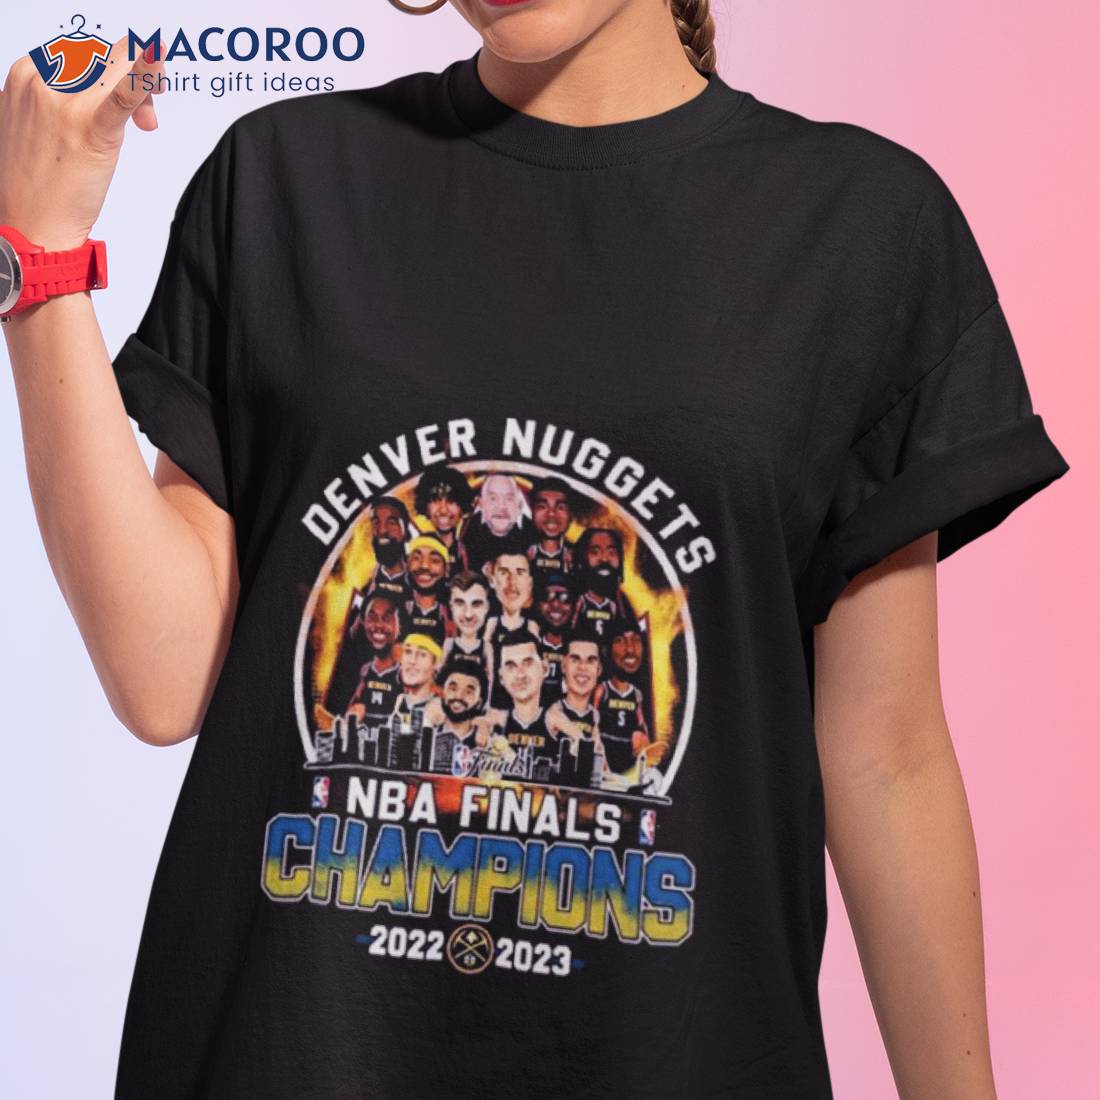 NBA caricature championship shirts over the years